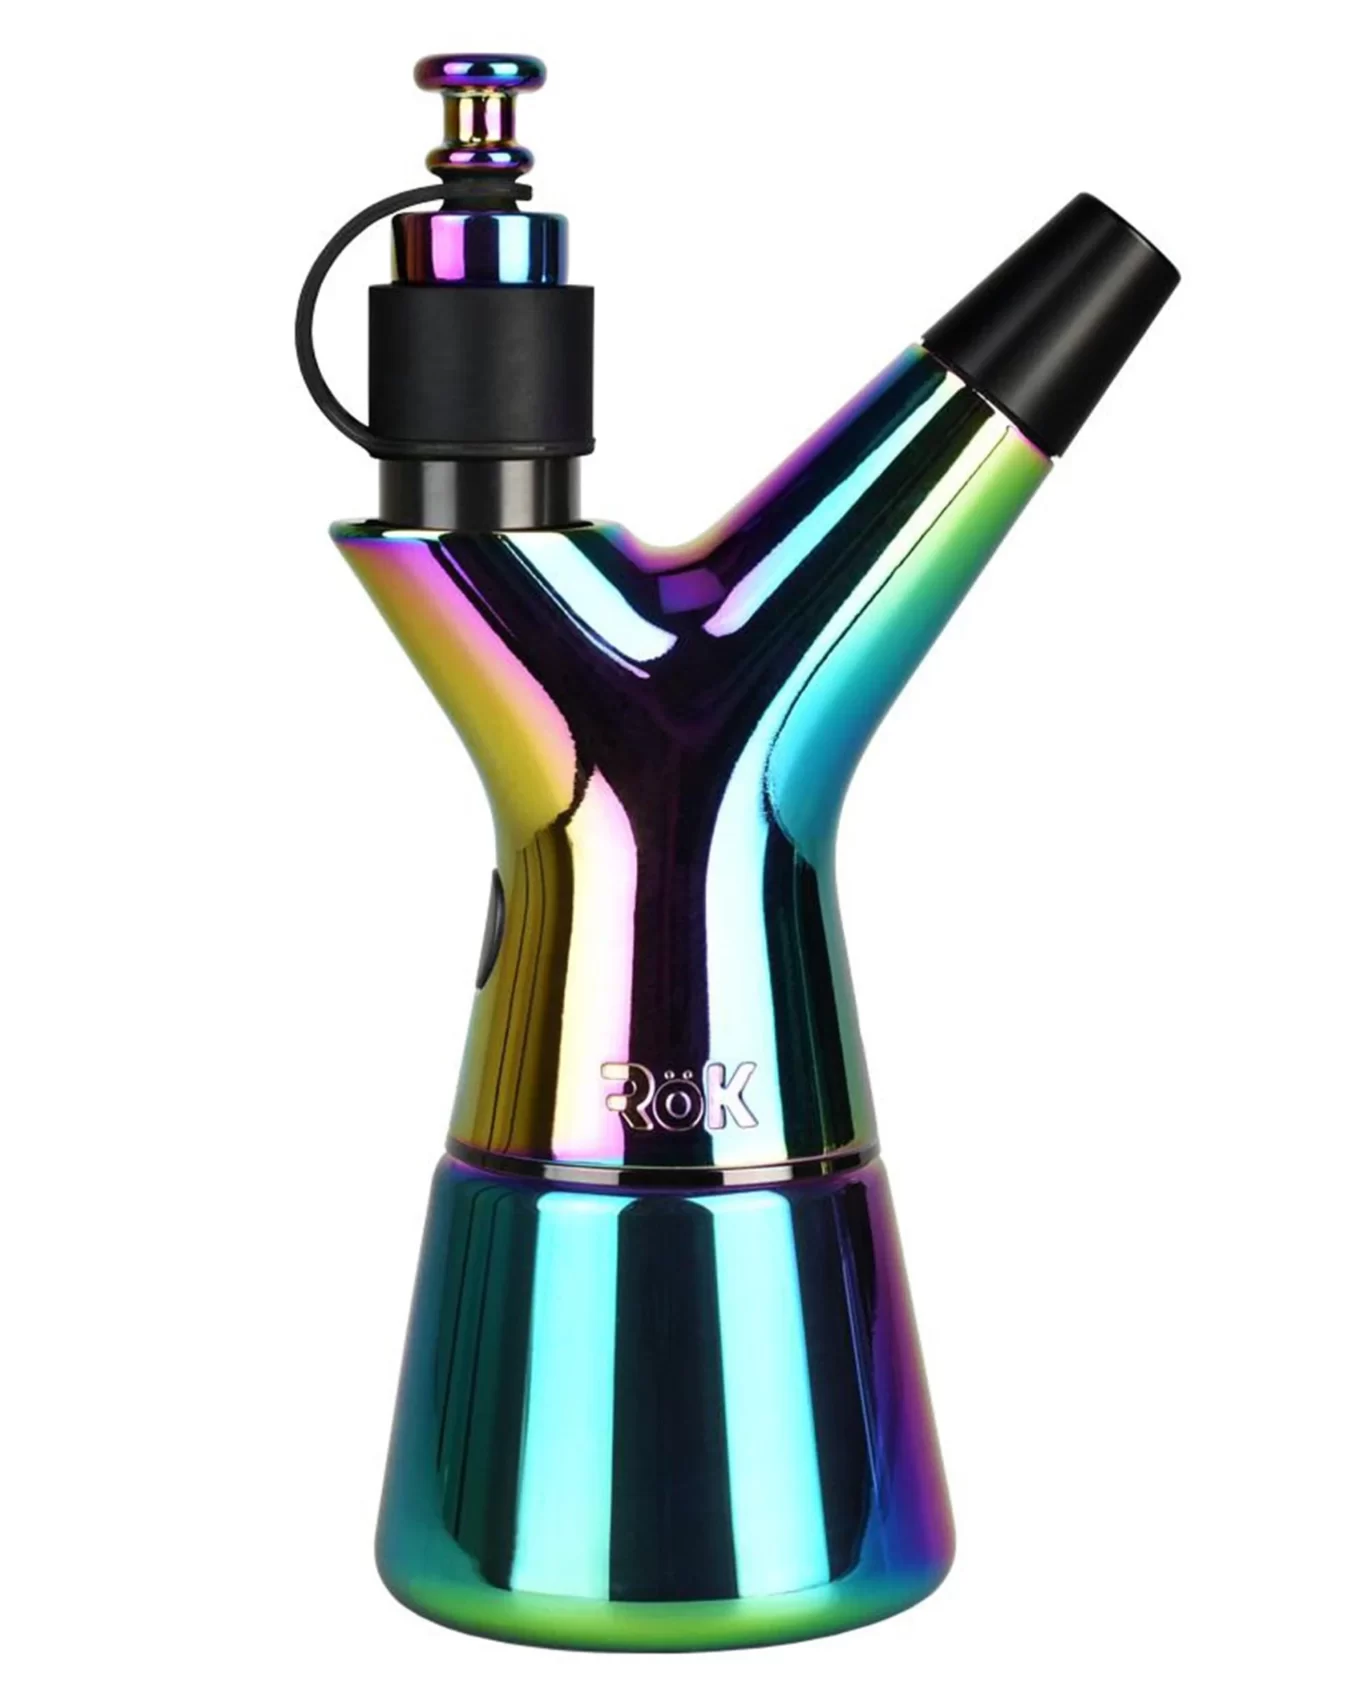 Pulsar Rok Electric Dab Rig FULL SPECTRUM Dry Herb and Wax Vaporizer Hybrid dual Dry Herb Atomizer Concentrate